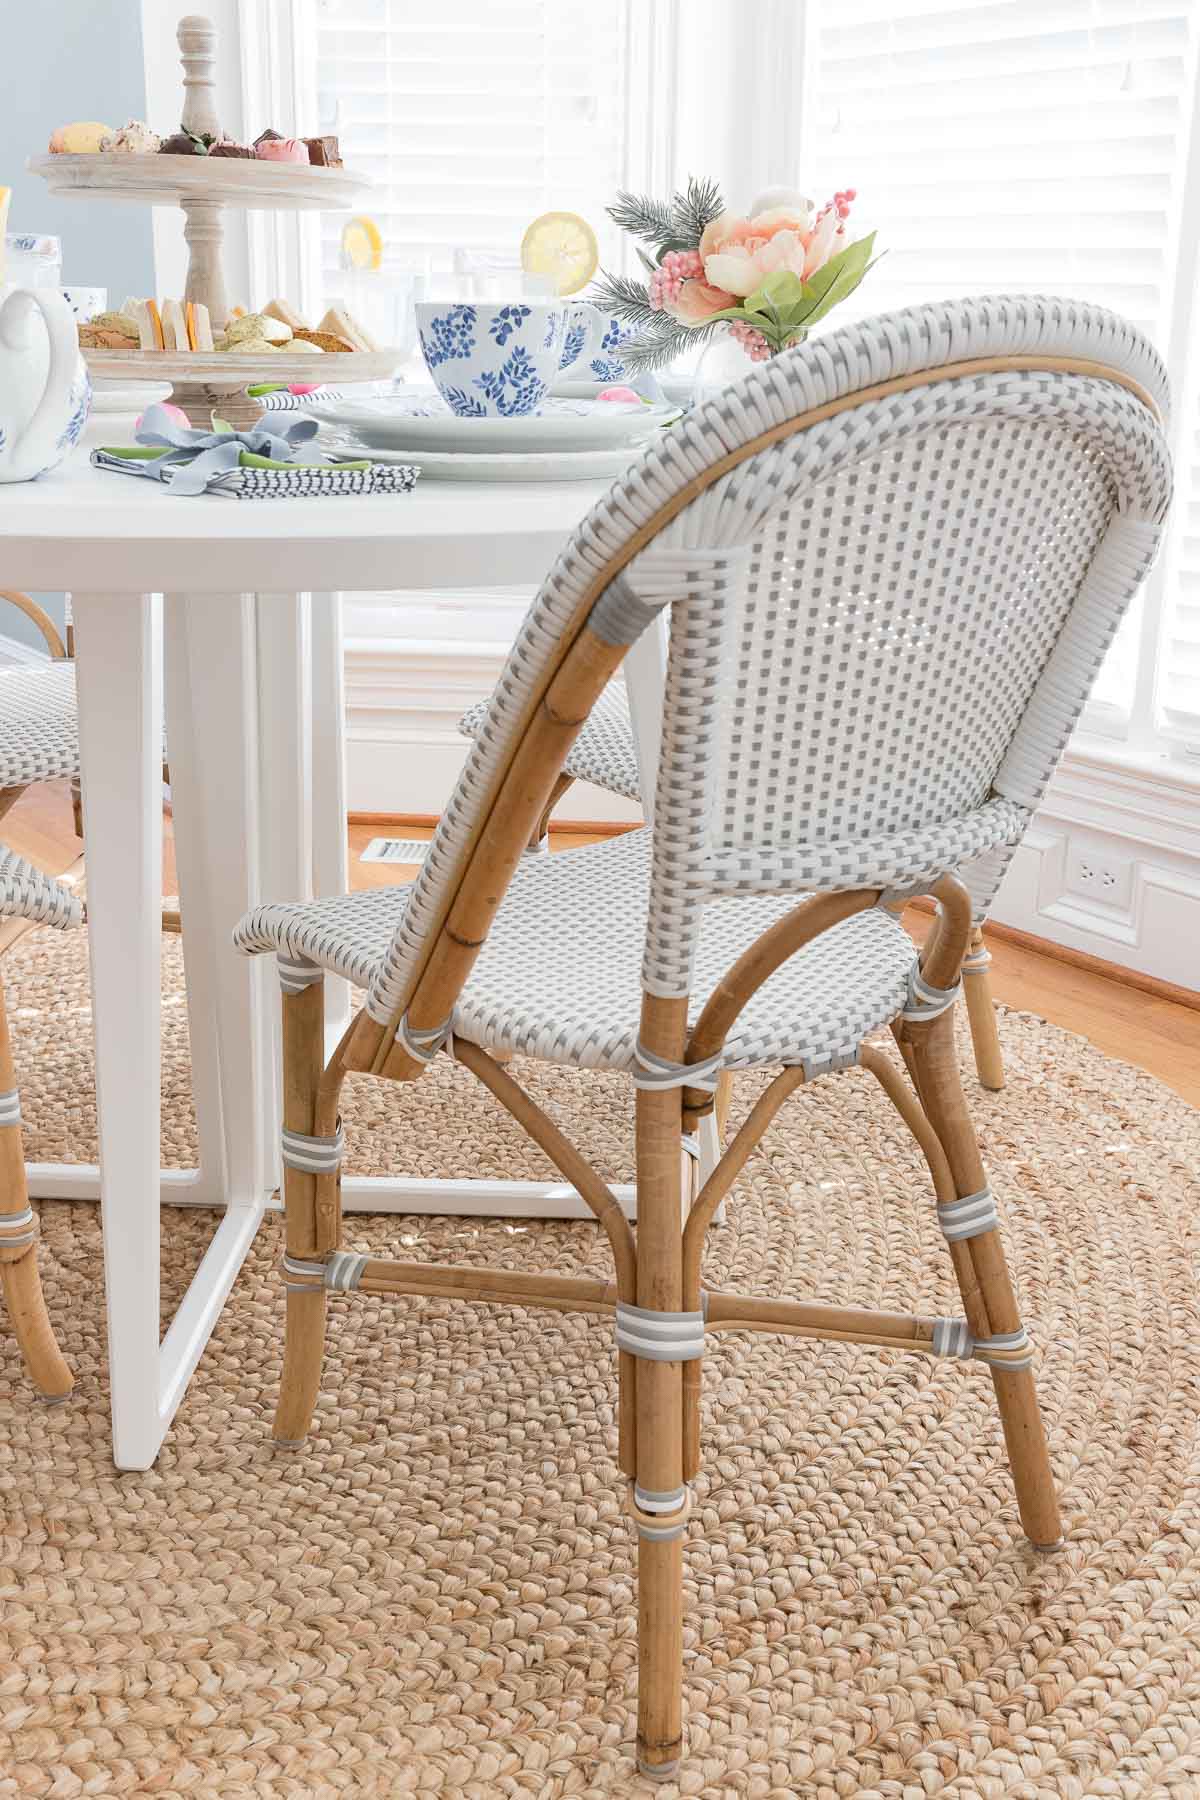 Rattan bistro dining chair with gray and white weave seat & back